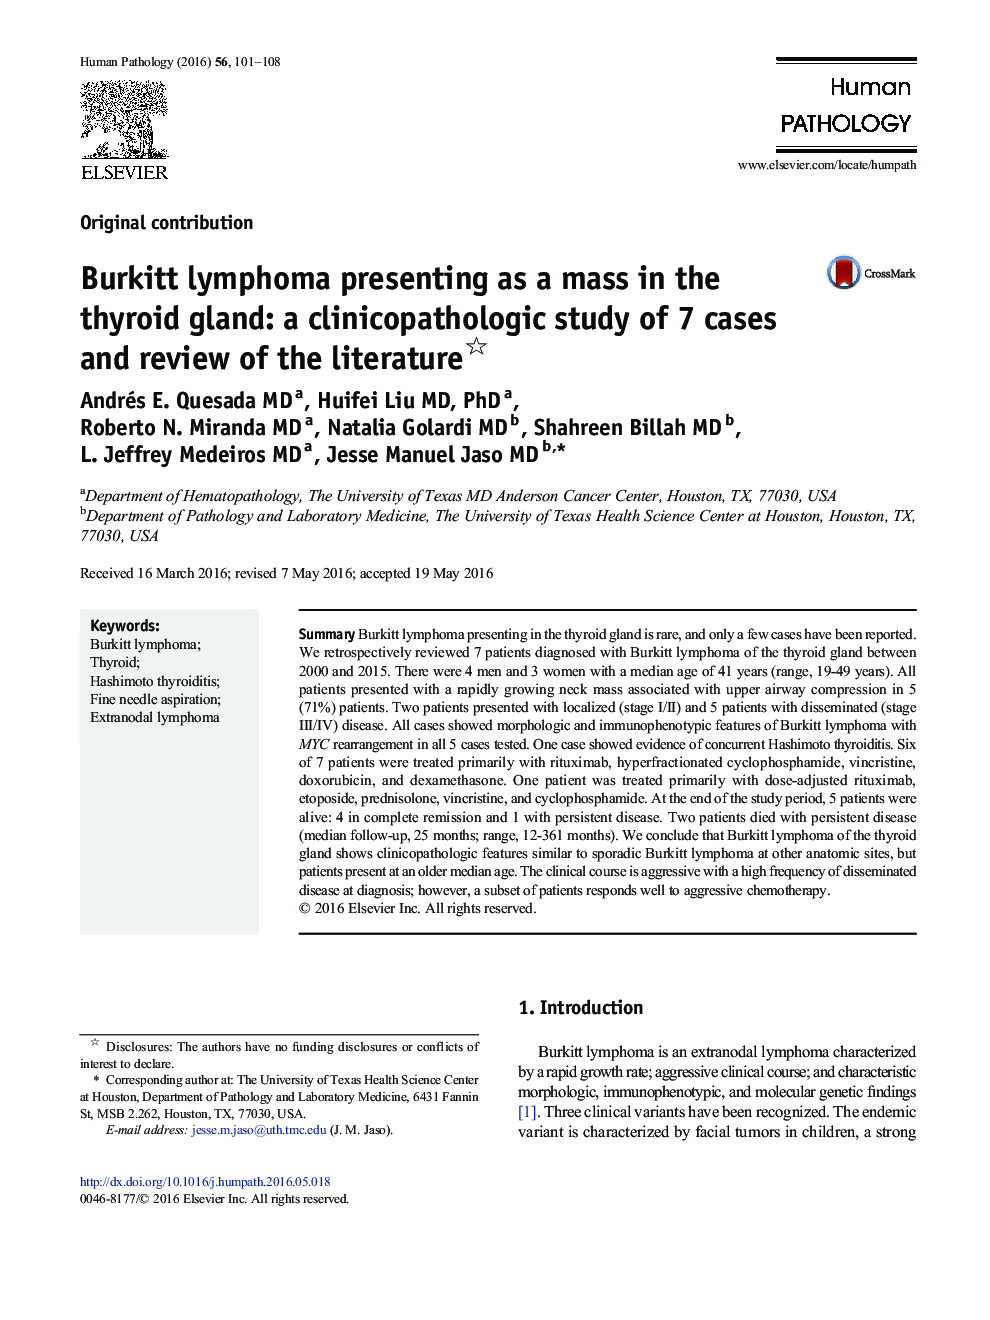 Burkitt lymphoma presenting as a mass in the thyroid gland: a clinicopathologic study of 7 cases and review of the literature 